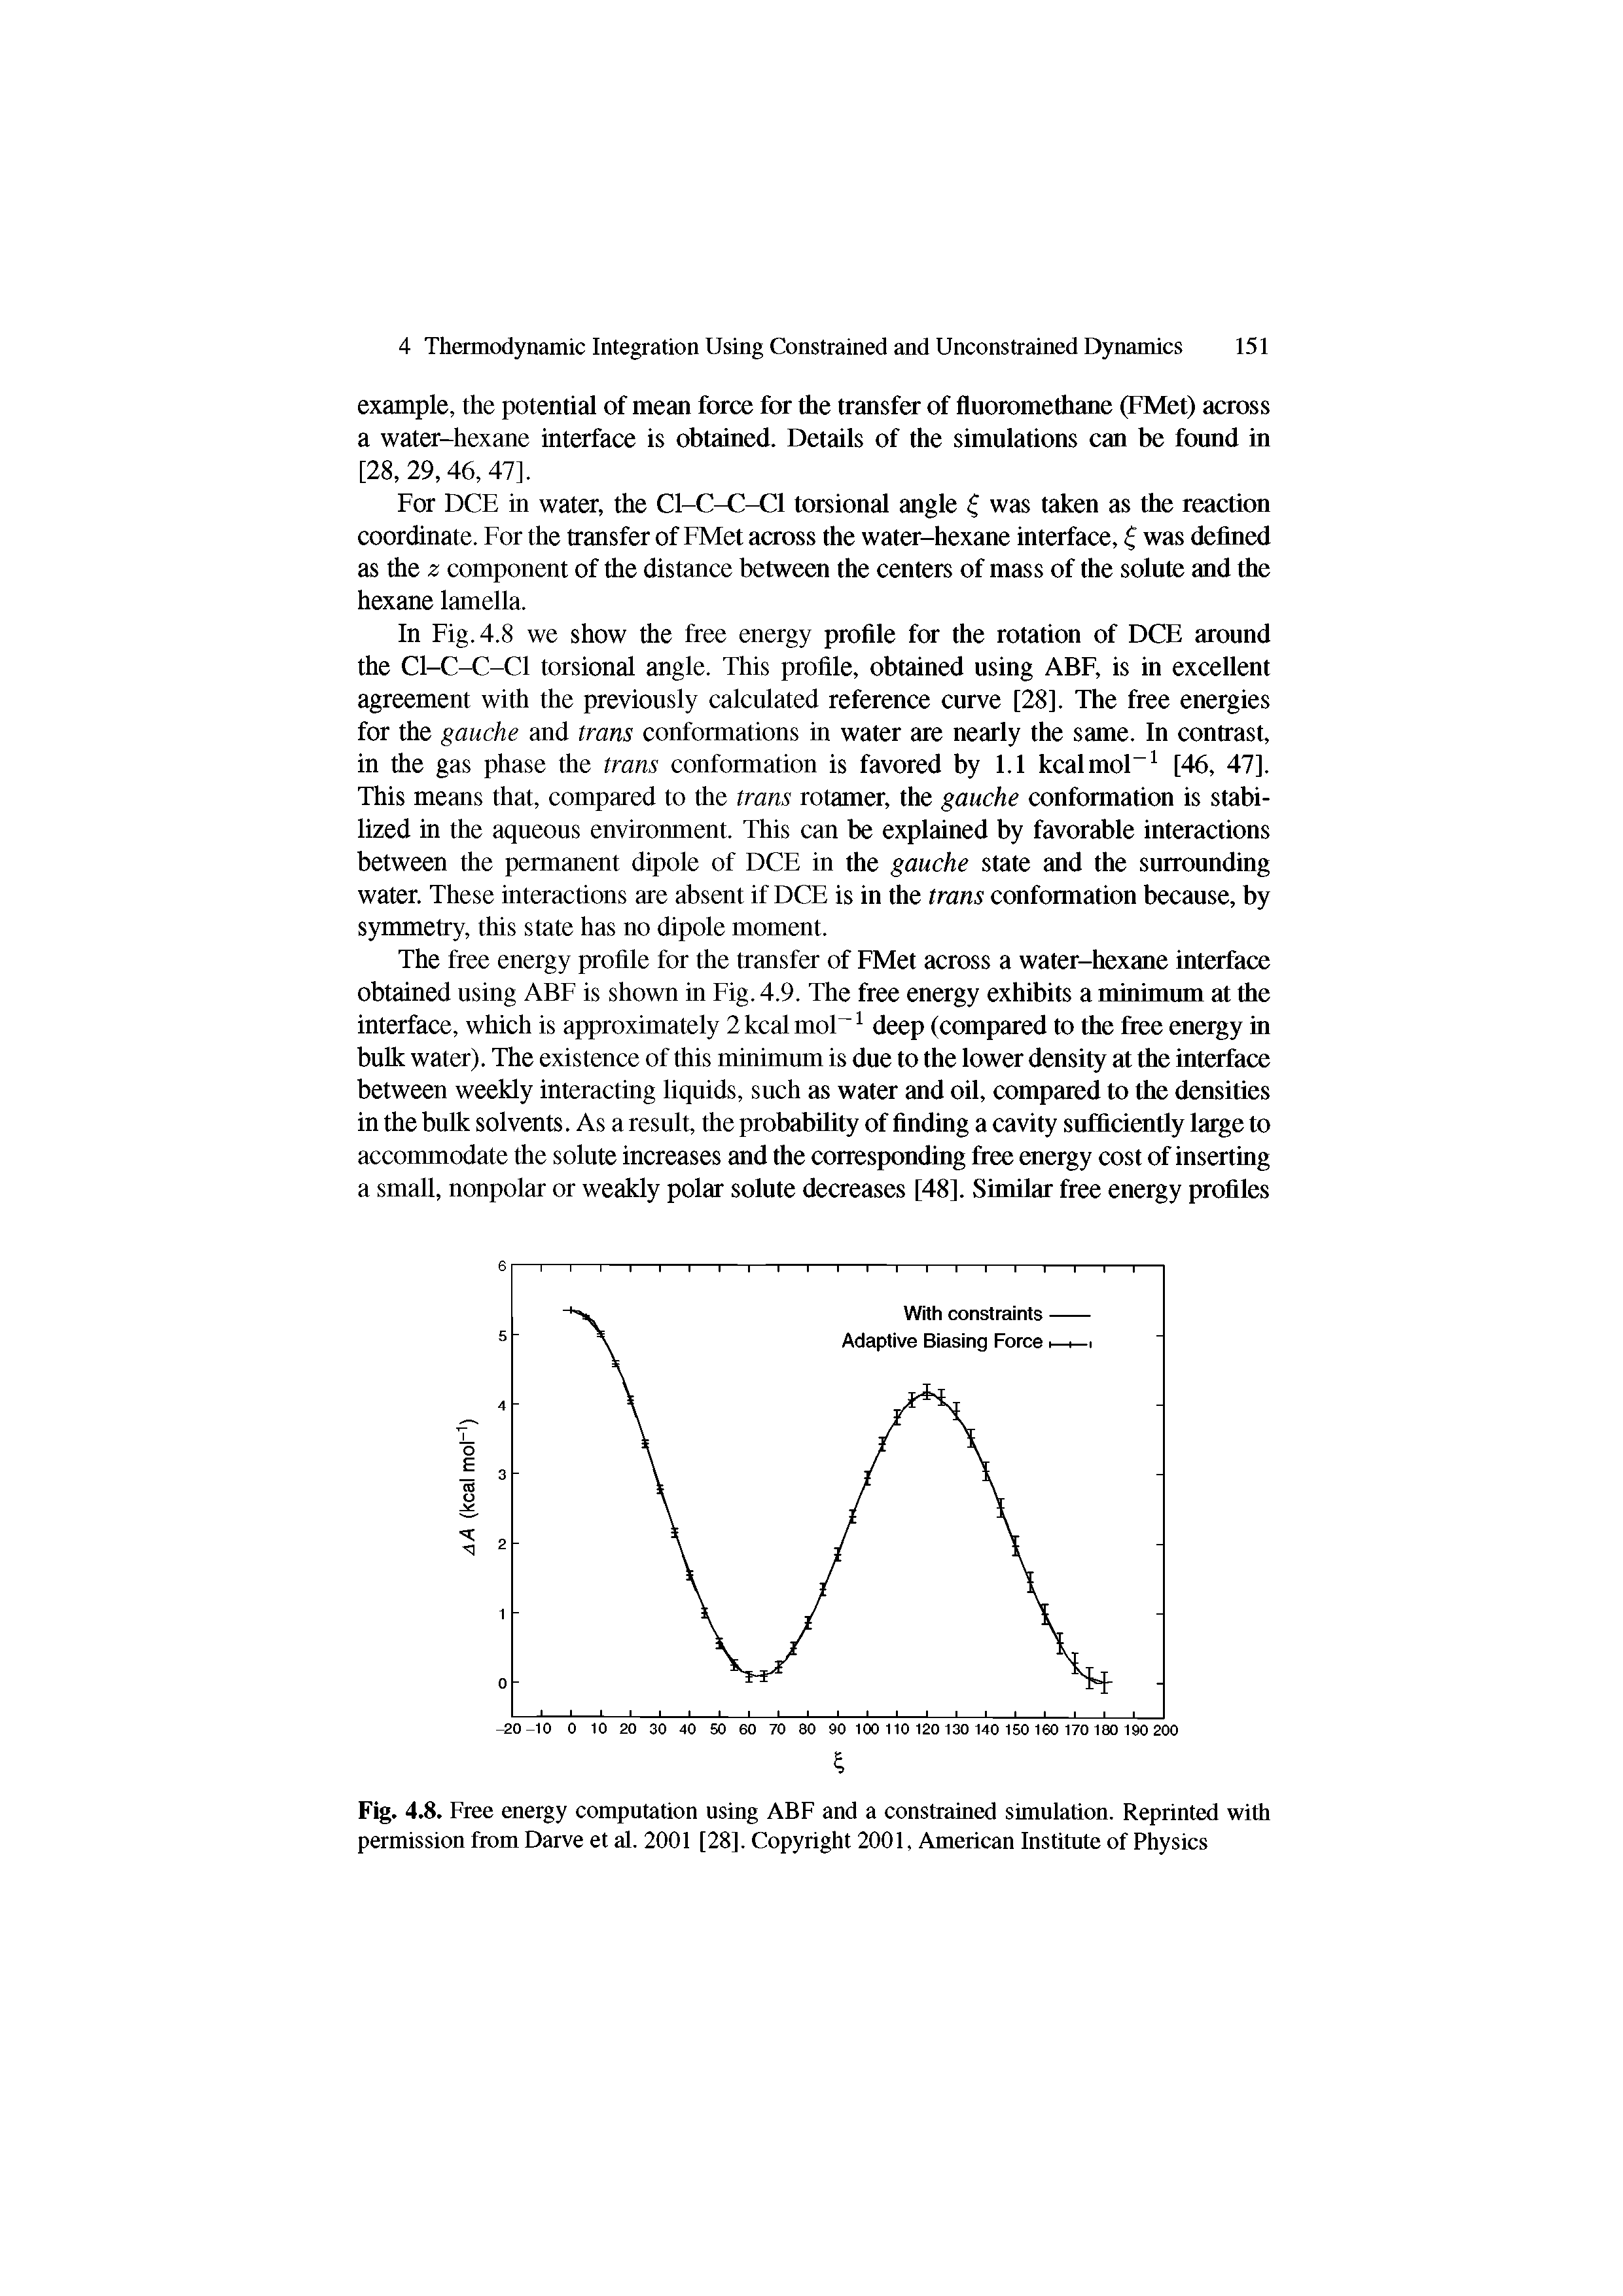 Fig. 4.8. Free energy computation using ABF and a constrained simulation. Reprinted with permission from Darve et al. 2001 [28], Copyright 2001, American Institute of Physics...